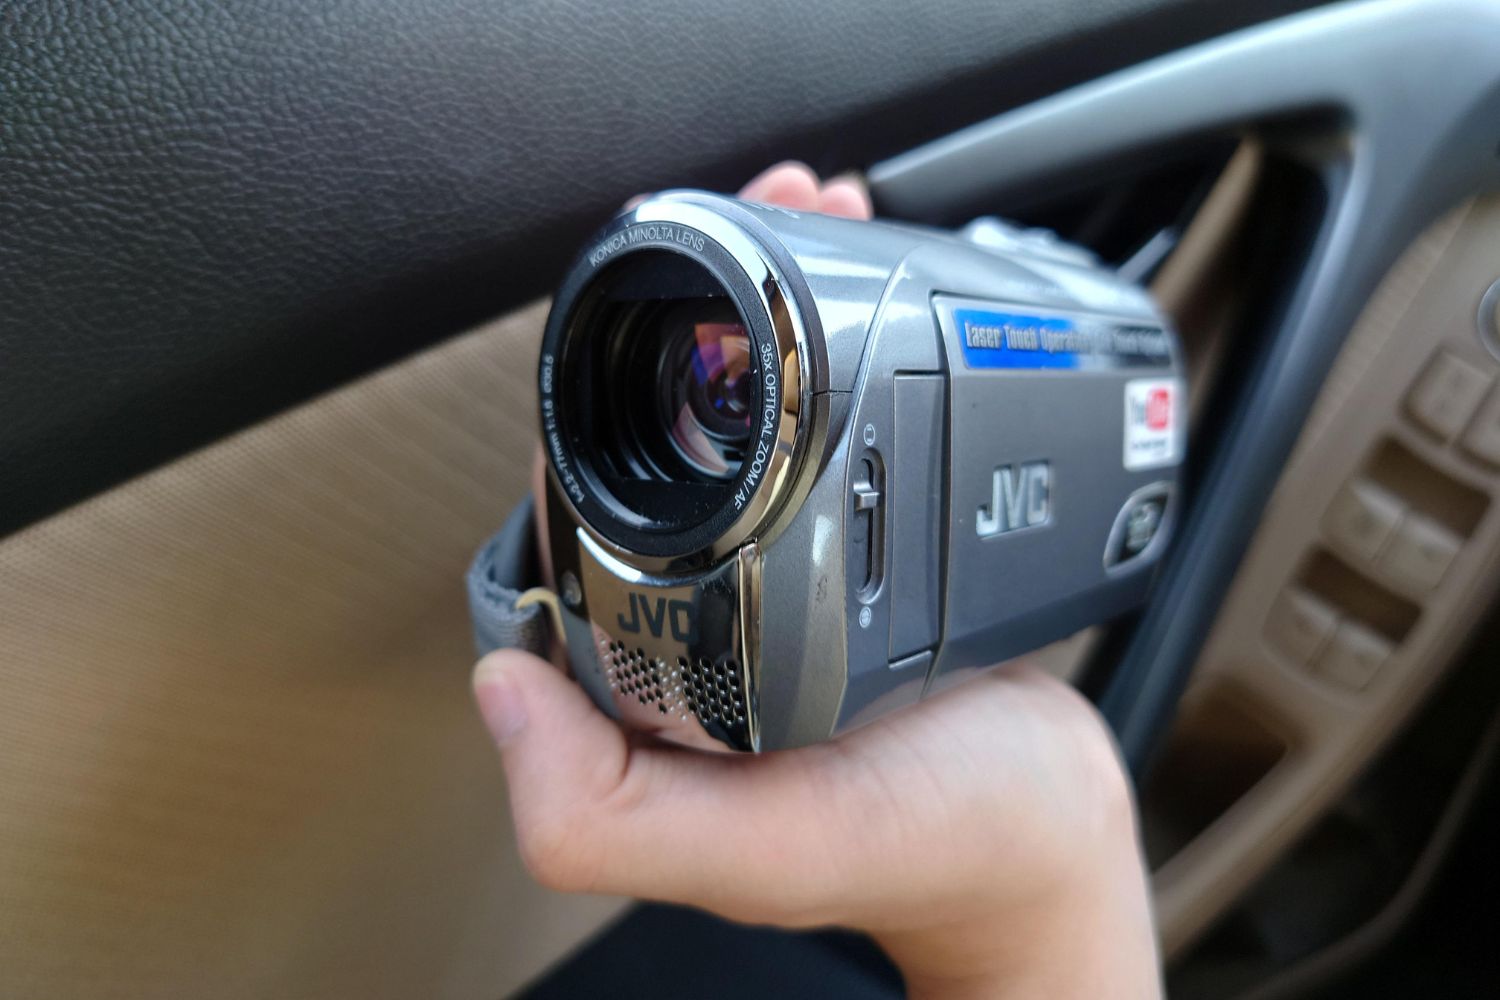 How To Upload Video From My JVC Everio Camcorder